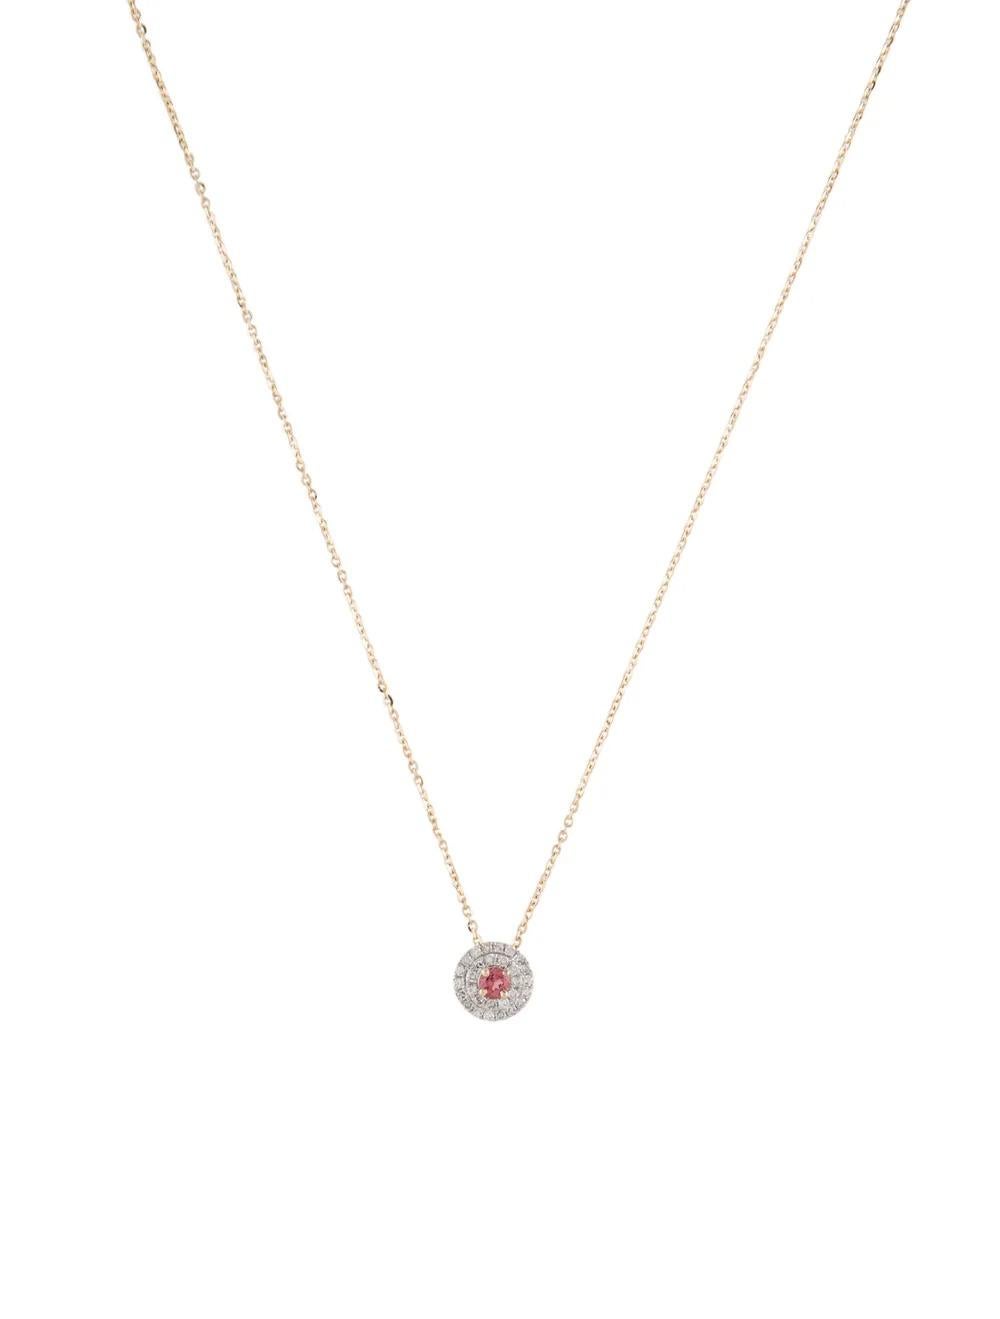 Introducing our exquisite 14K Yellow Gold Tourmaline & Diamond Pendant Necklace, a dazzling piece of fine jewelry that exudes elegance and sophistication.

Specifications:

* Metal: 14K Yellow Gold
* Length: Adjustable from 16